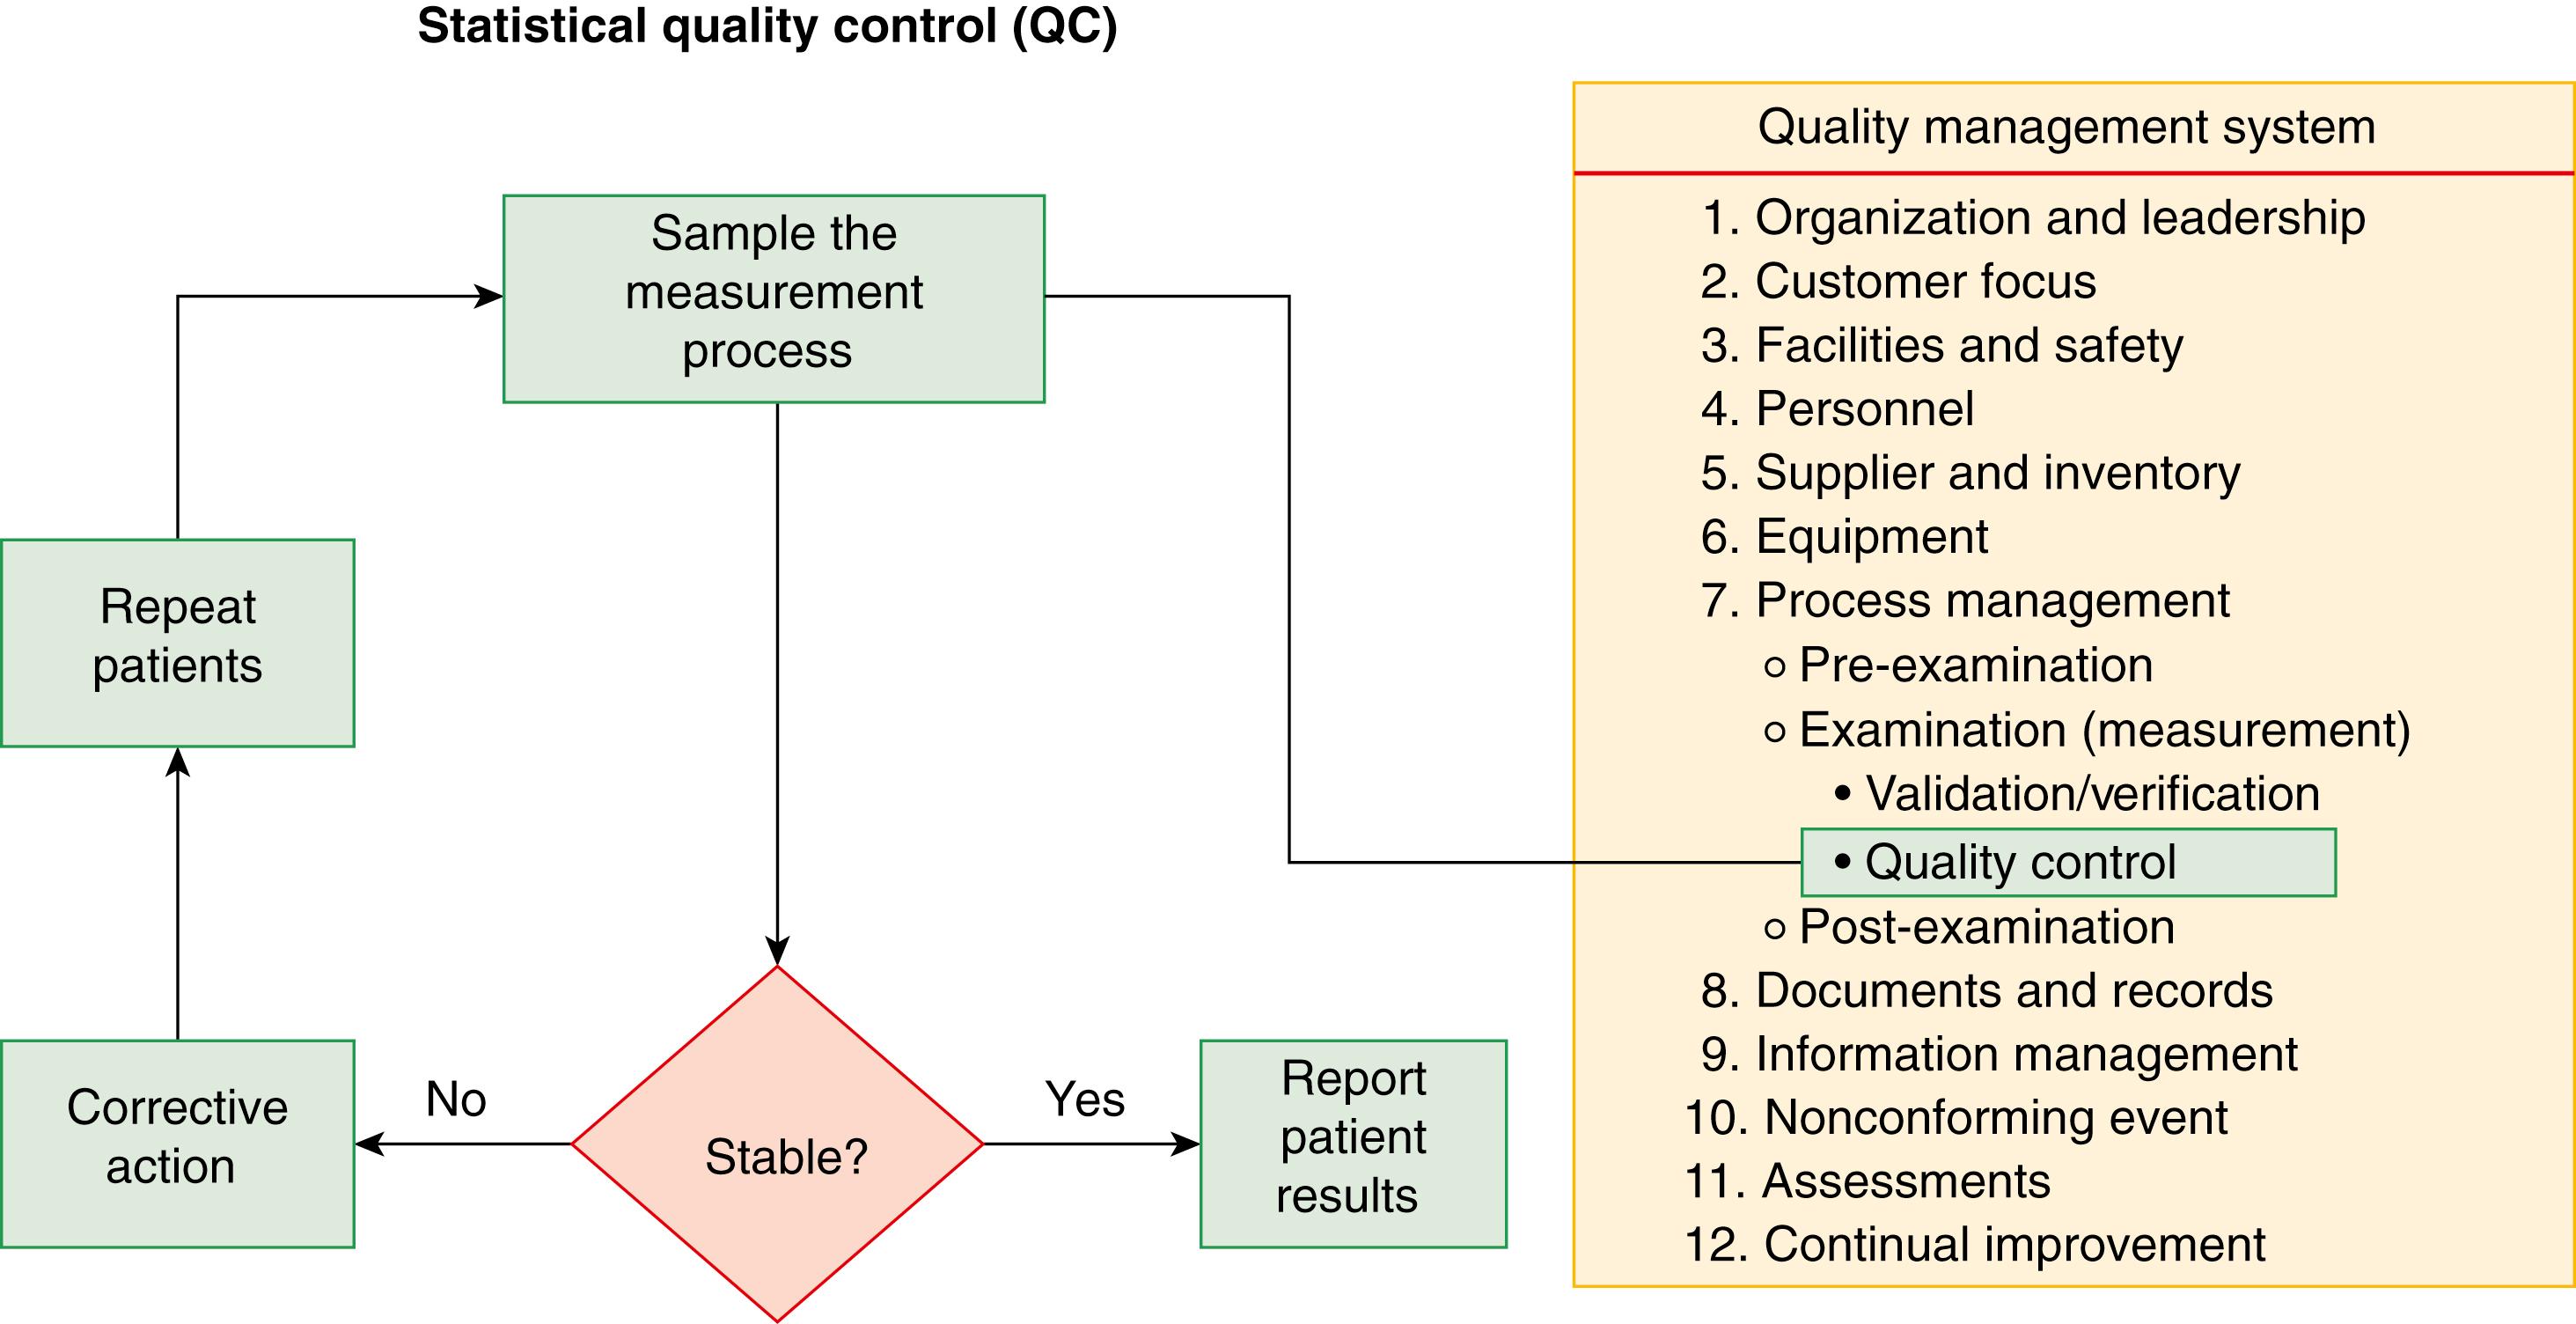 Figure 11.5, Overview of statistical quality control and its integration into a quality management system. The quality management system essentials are summarized from CLSI QMS-01 A Quality Management System Model for Laboratory Services , 5th edition ( CLSI 2019 ).